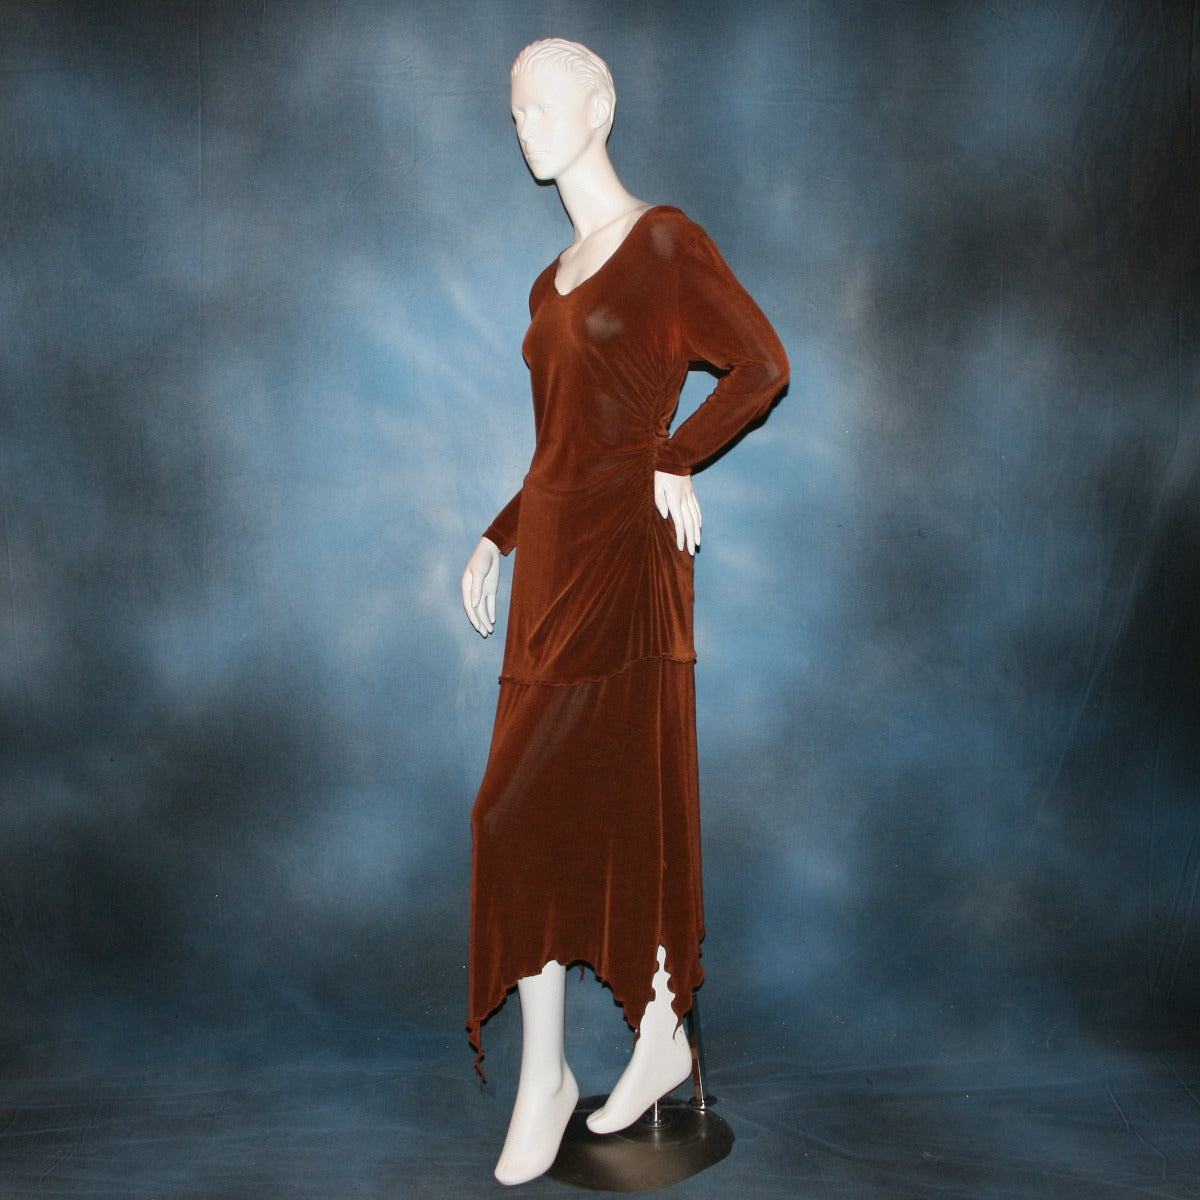 side view of Cinnamon brown long sleeve angle cut tunic top includes A-line skirt with angle cuts of cinnamon brown colored solid slinky fabric, of which the tunic top can be worn as a simple Latin/rhythm dress... can be custom created in many colors.